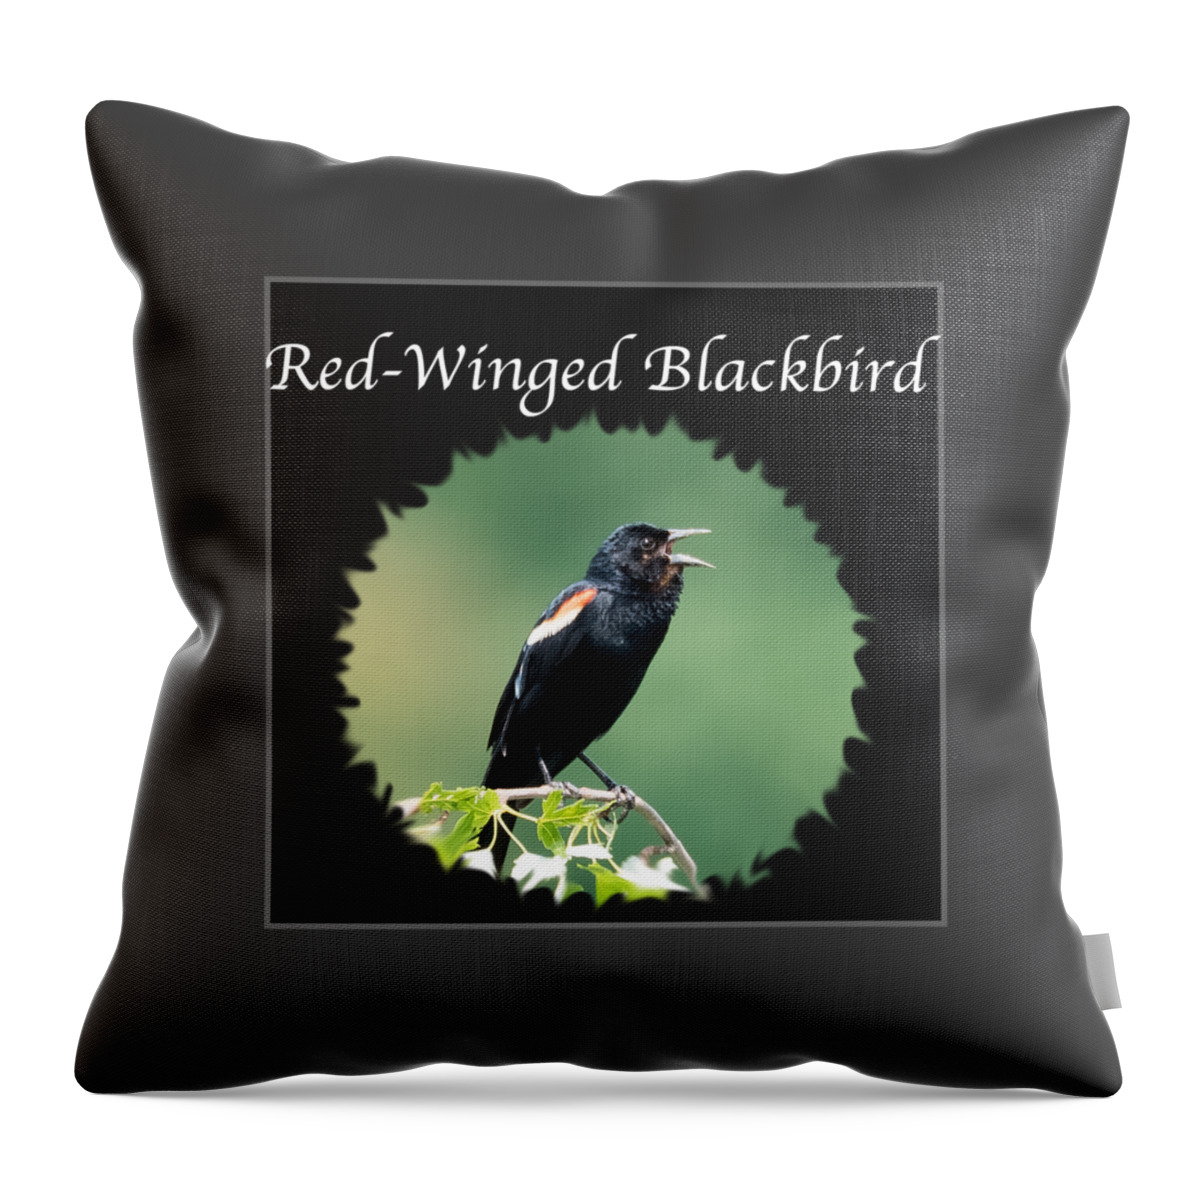 Red-winged Blackbird Throw Pillow featuring the photograph Red-Winged Blackbird by Holden The Moment